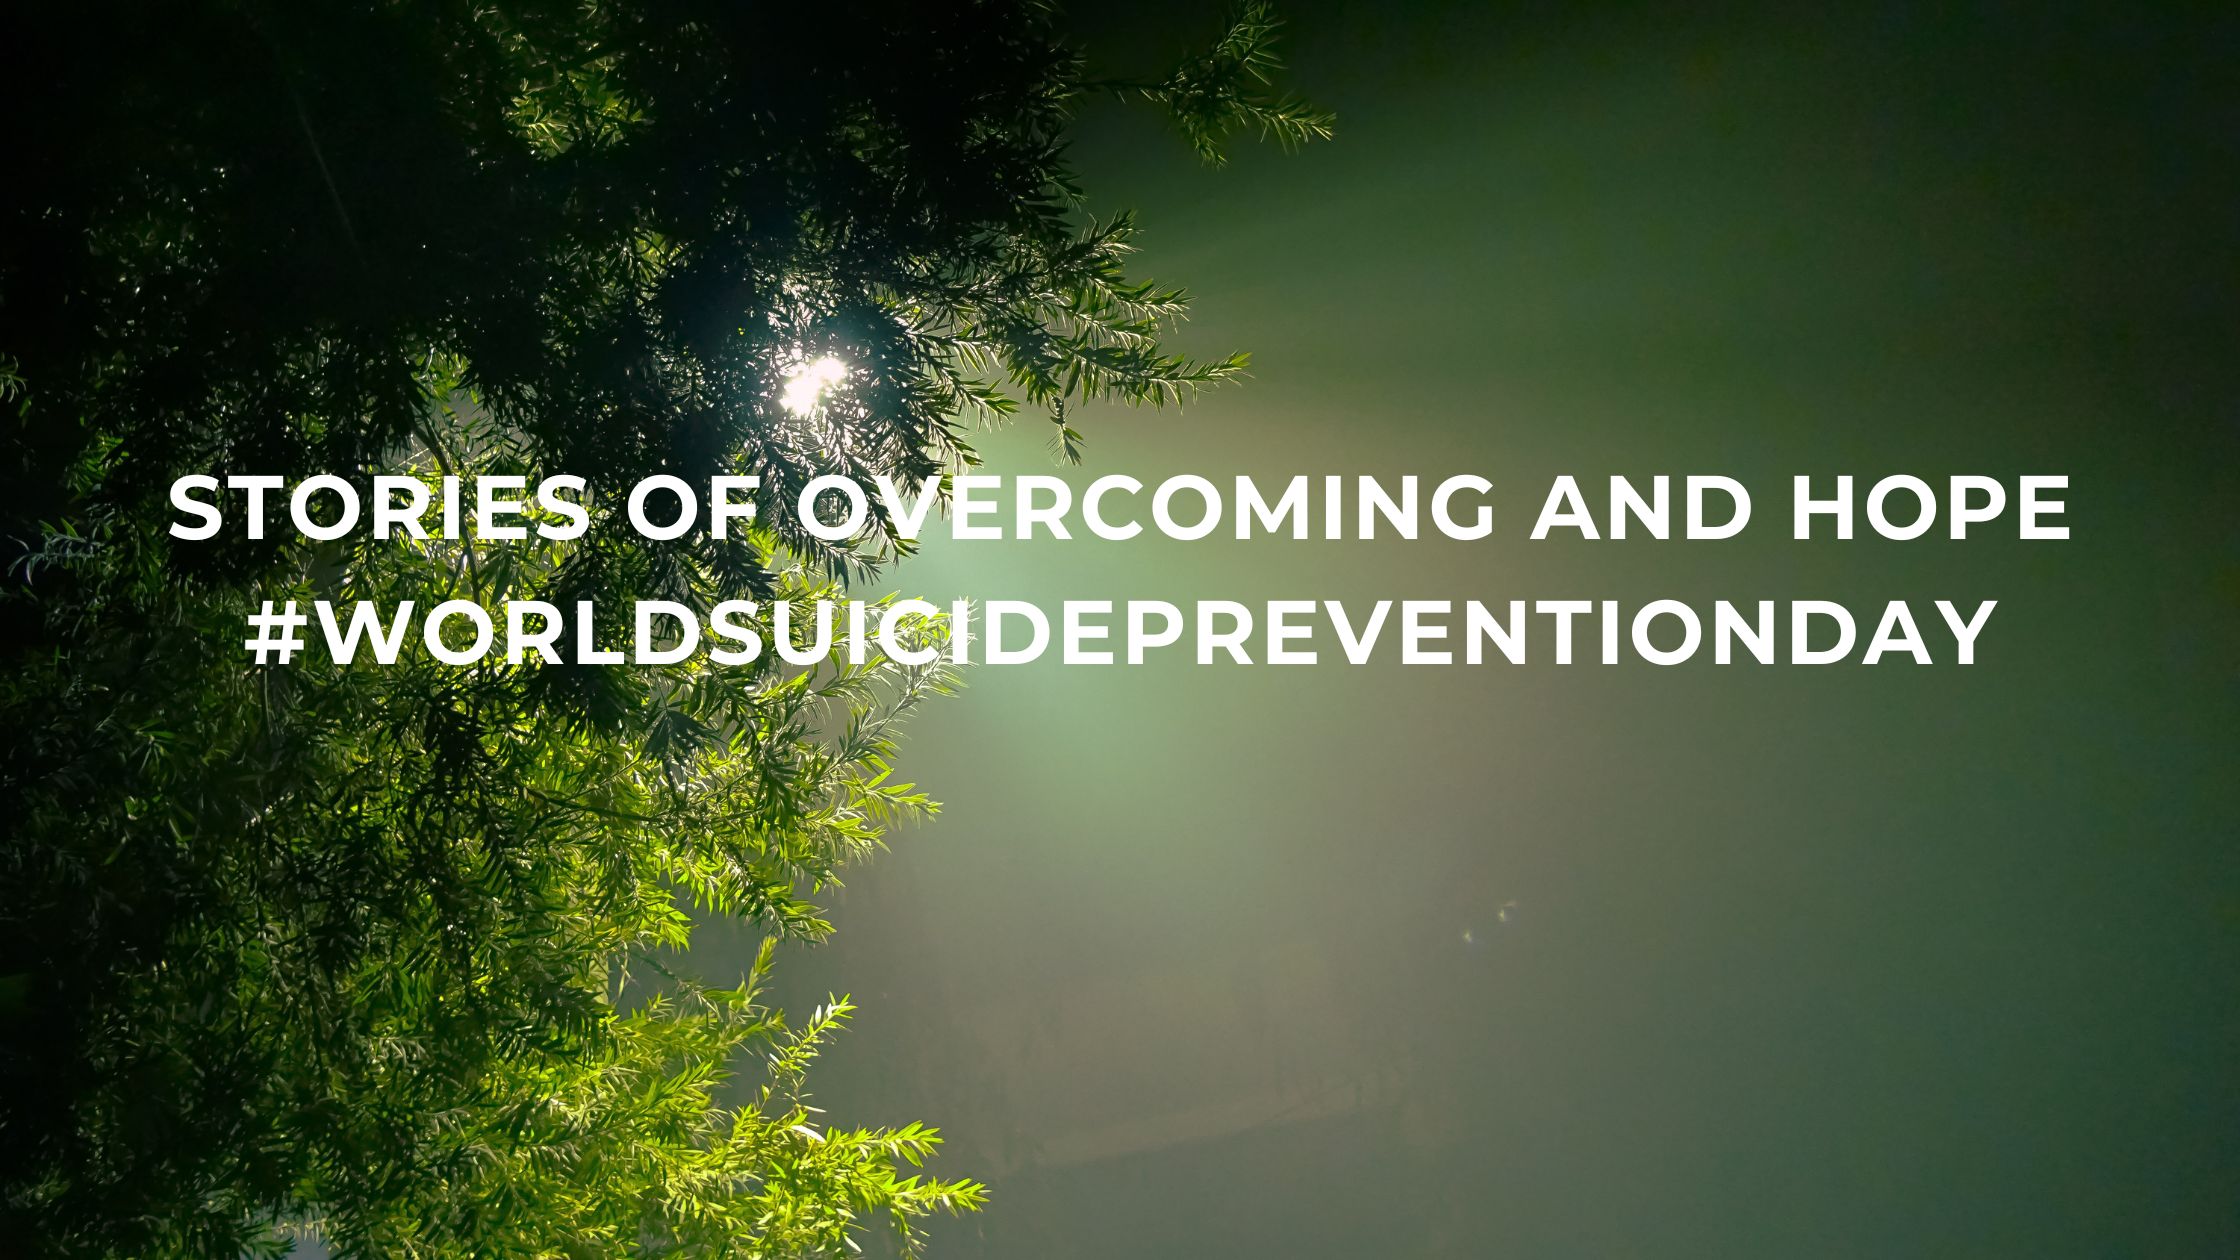 Stories of overcoming and hope #WorldSuicidePreventionDay